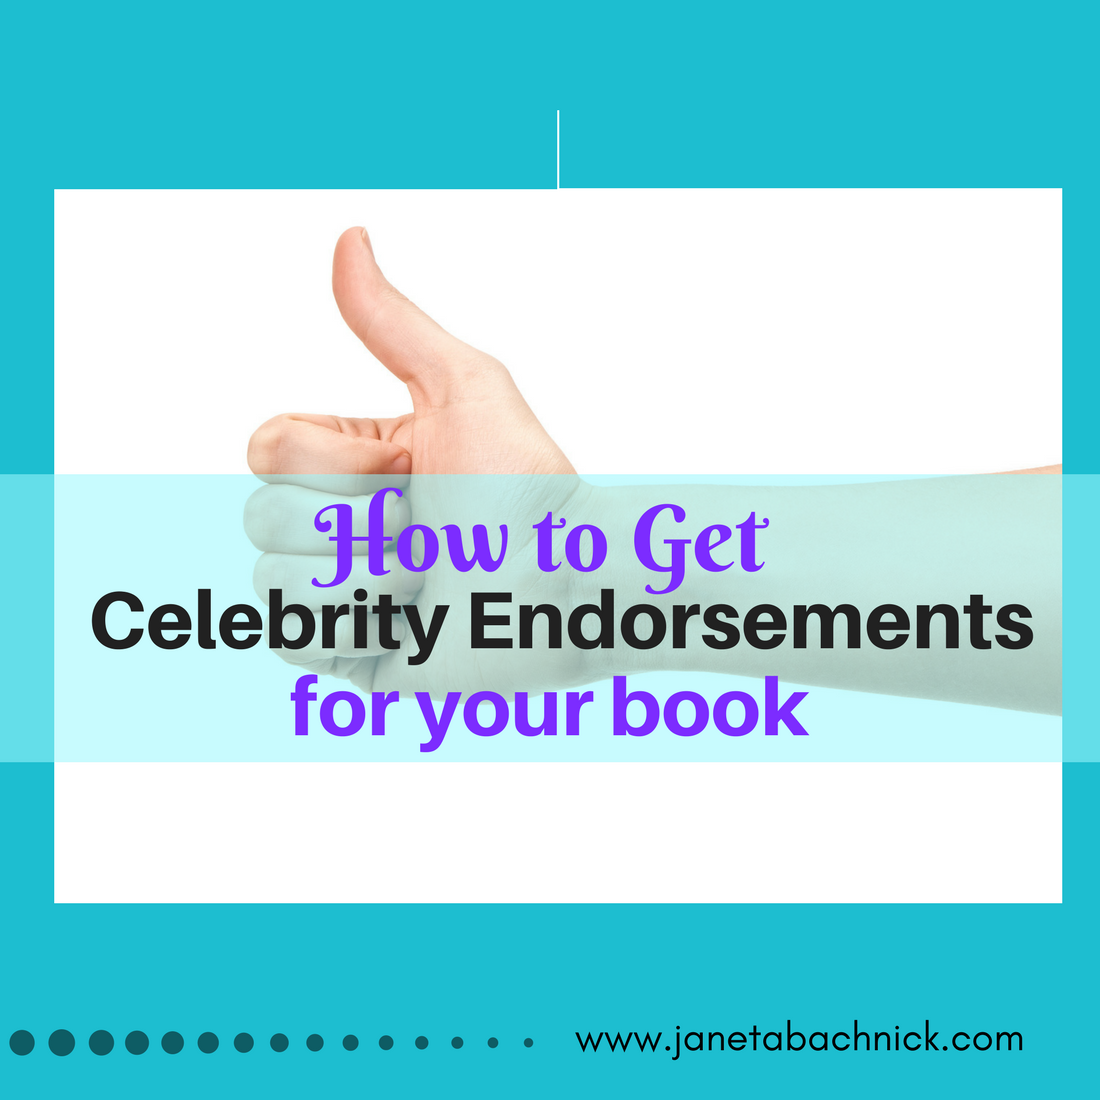 How to get celebrities to endorse your book